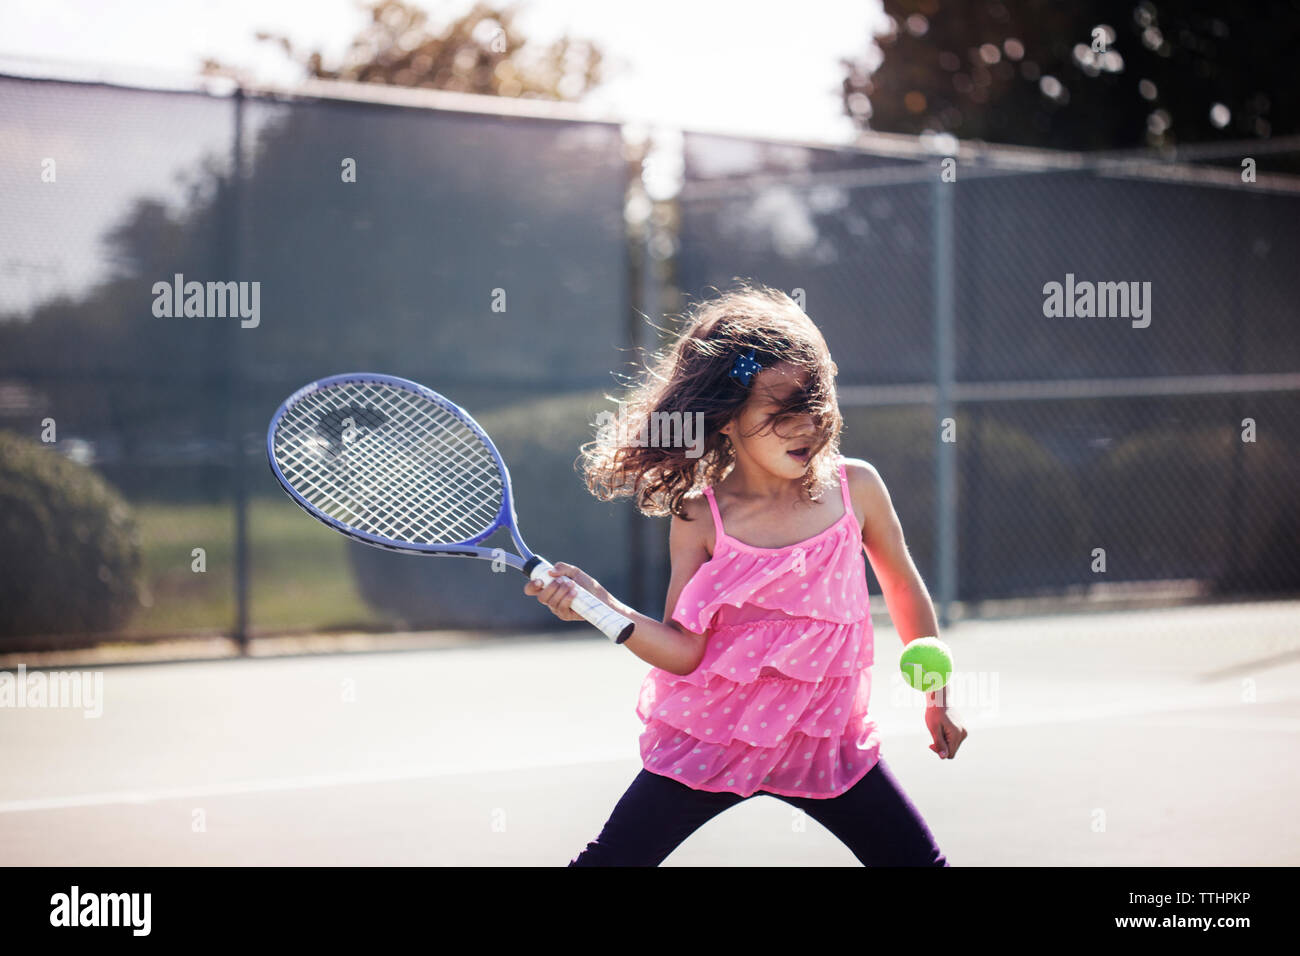 Girl playing tennis on court Stock Photo